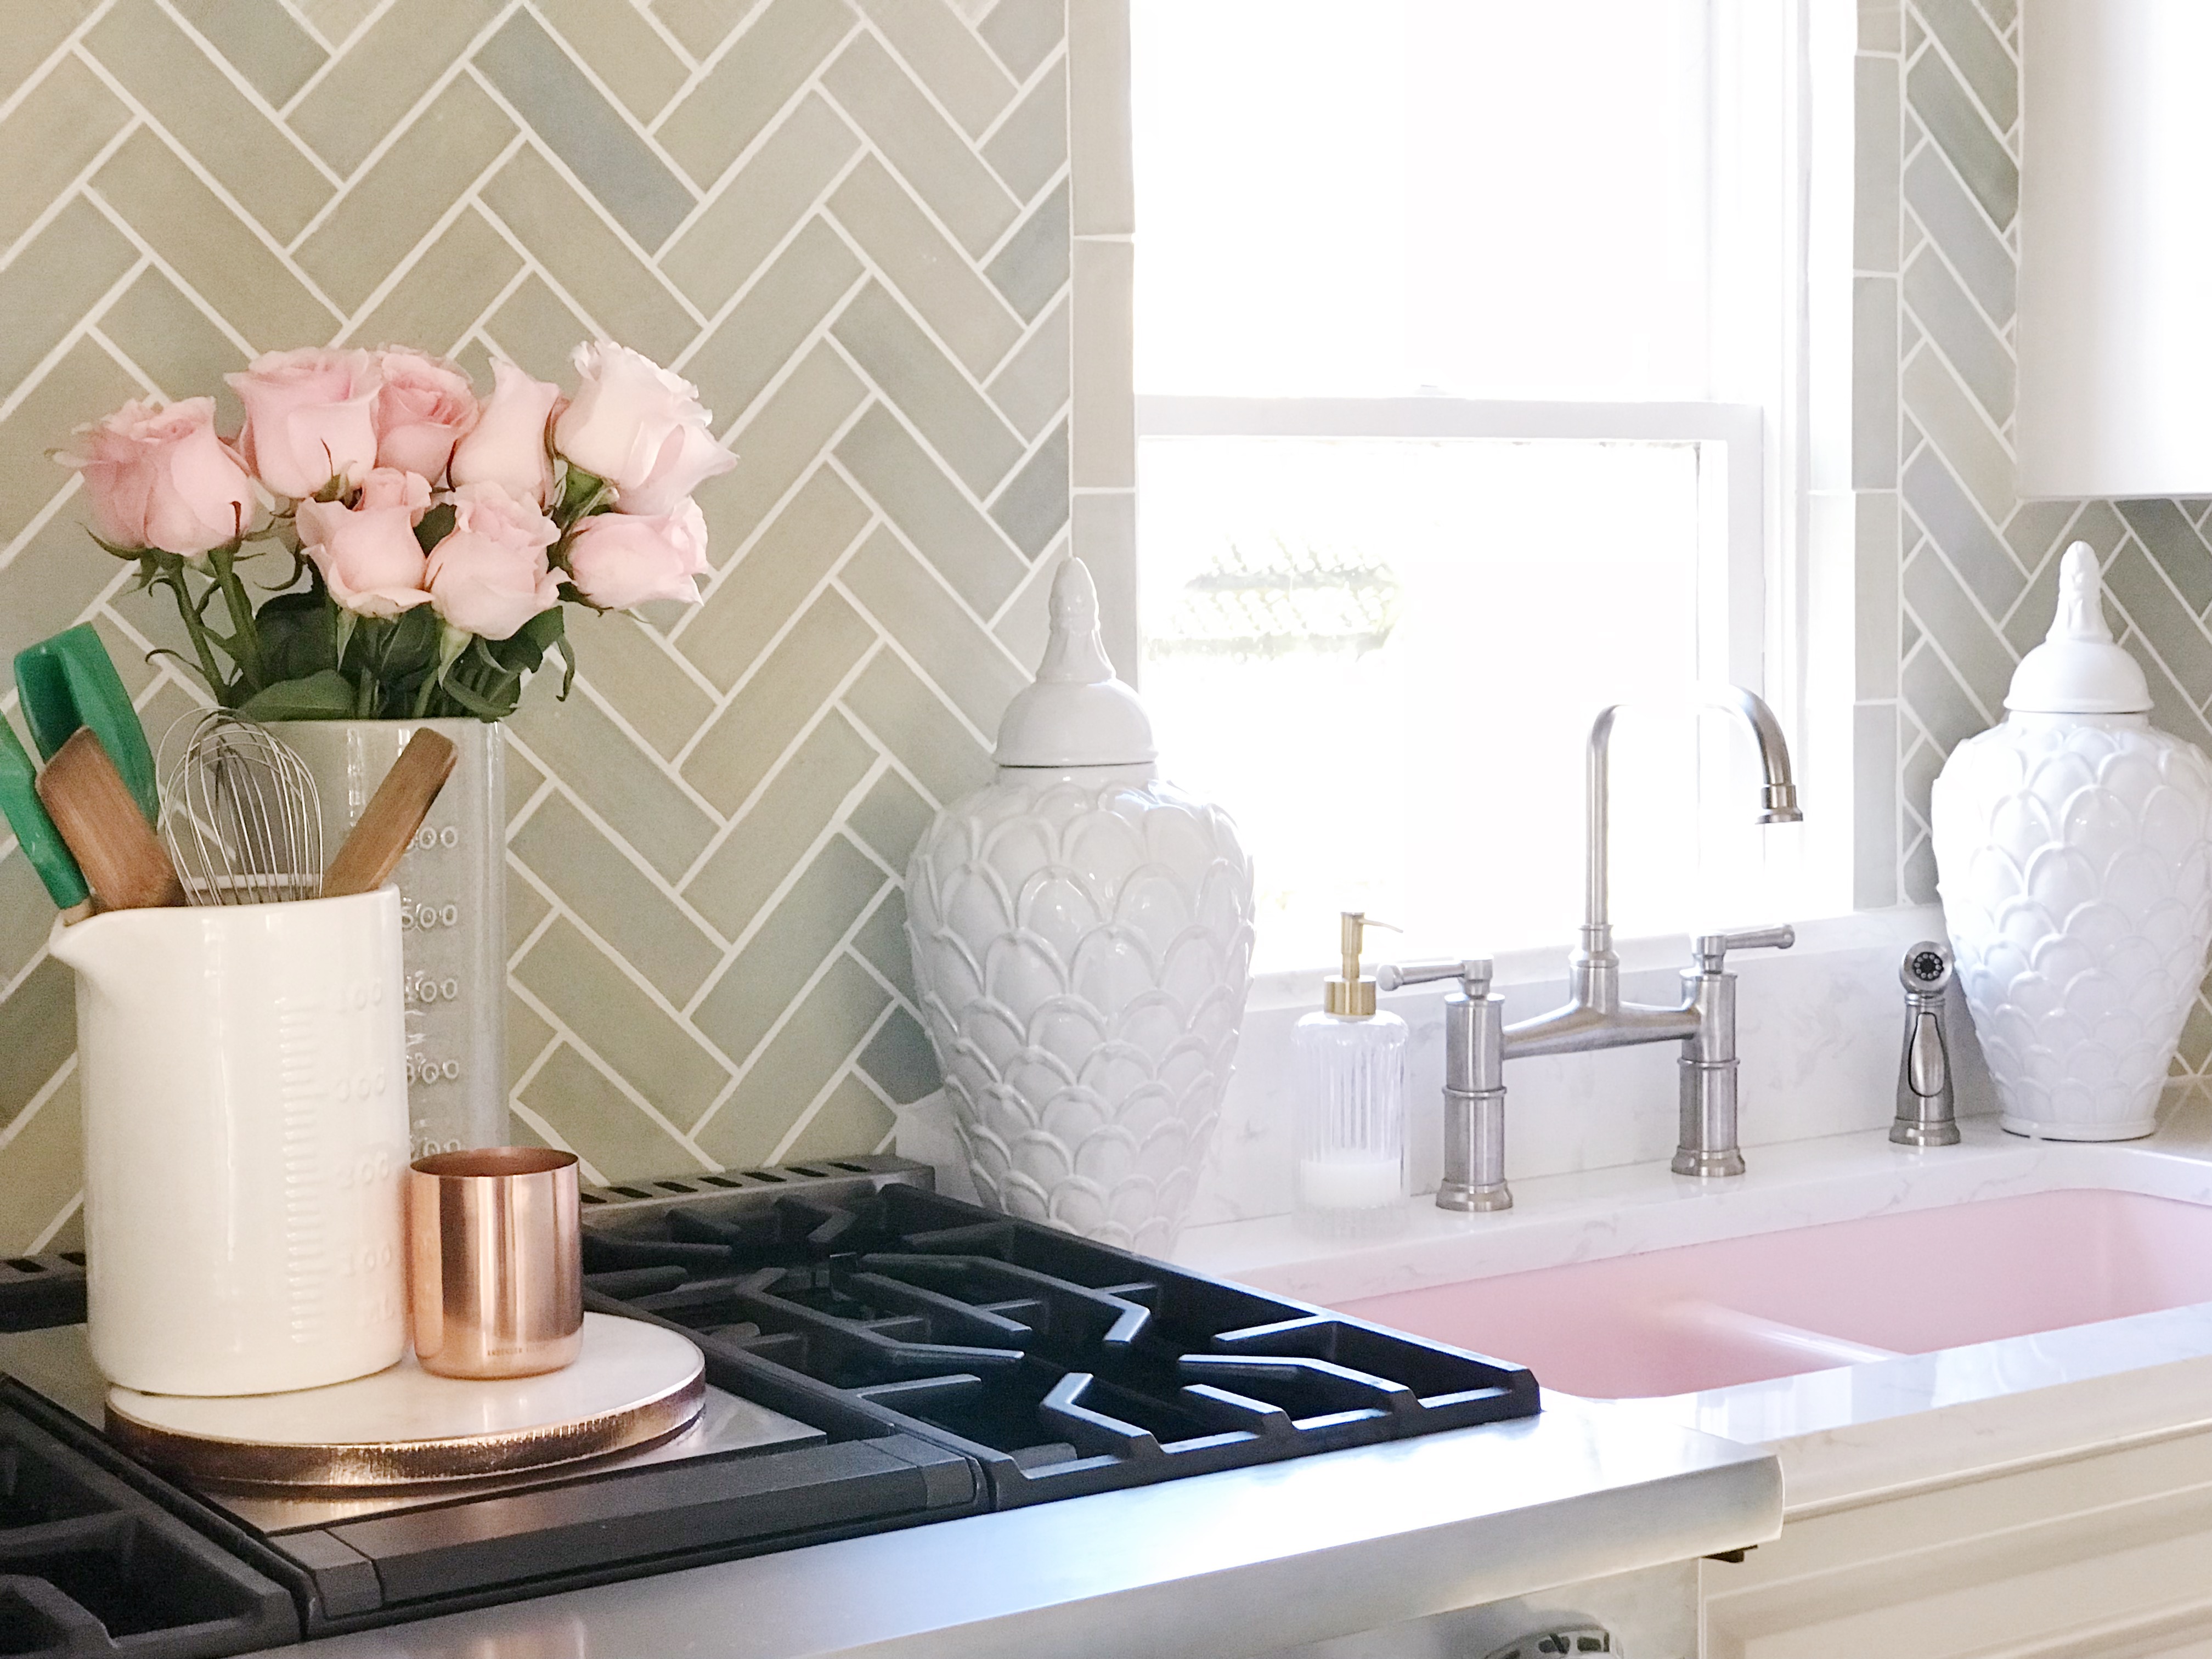 https://thelesliestyle.com/wp-content/uploads/2018/03/white-ginger-jars-pink-roses-pink-sink.jpg